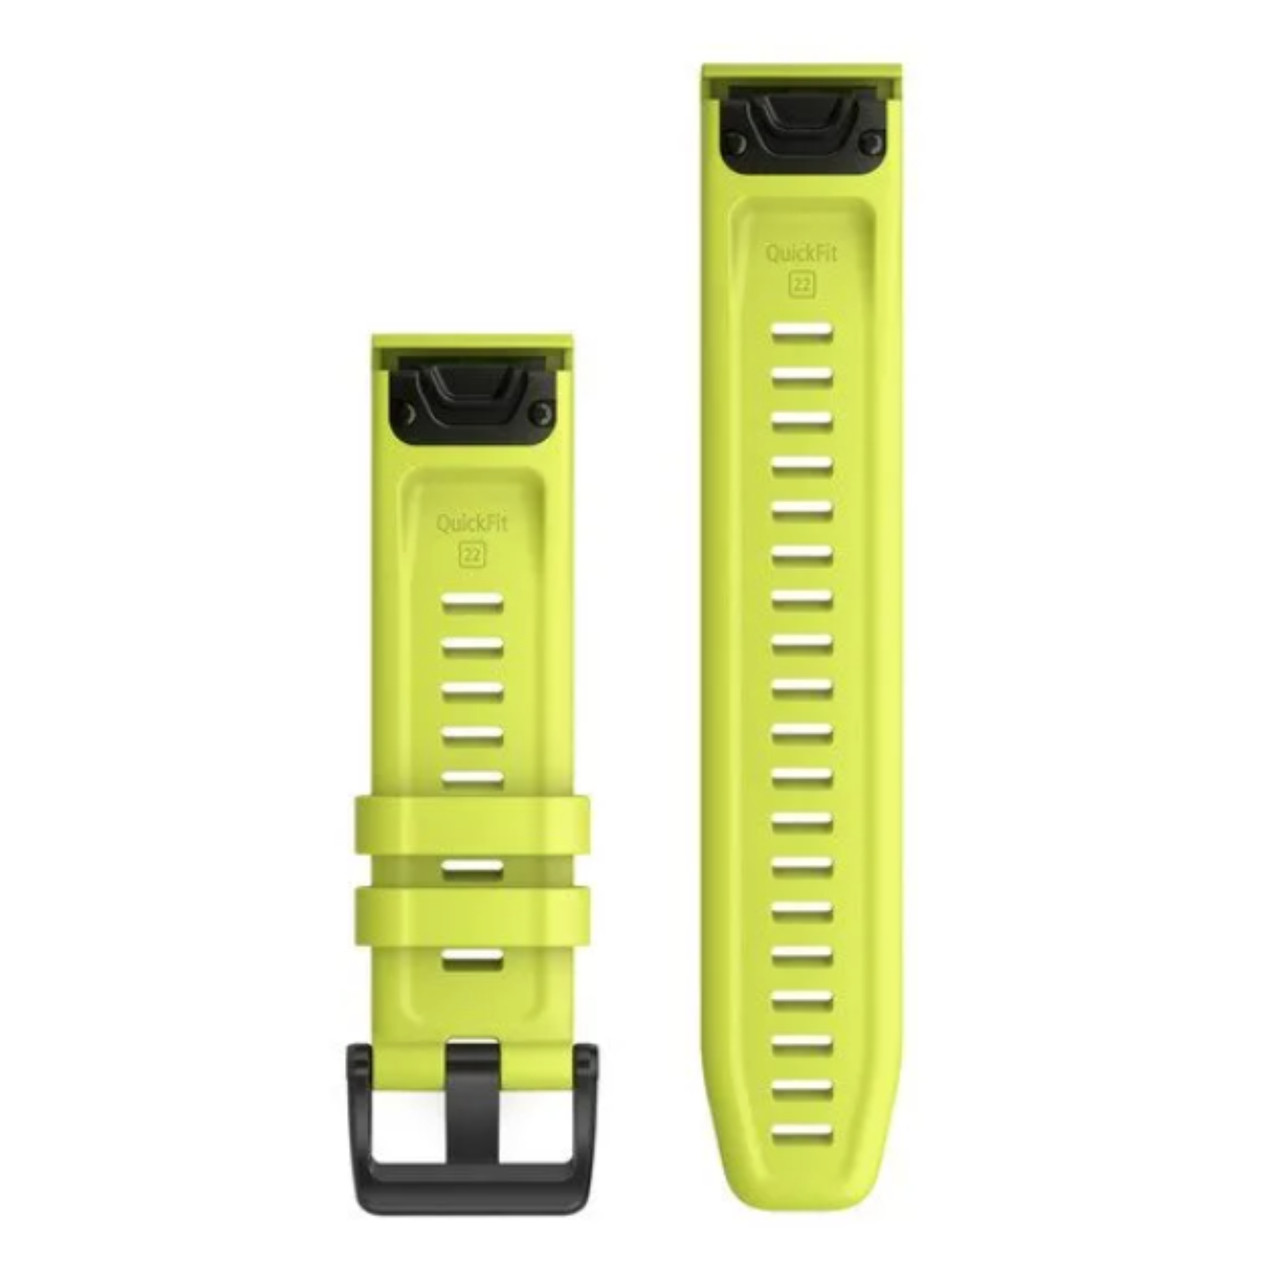 Garmin New OEM QuickFit® 22 Watch Bands Amp Yellow Silicone, 010-12863-04